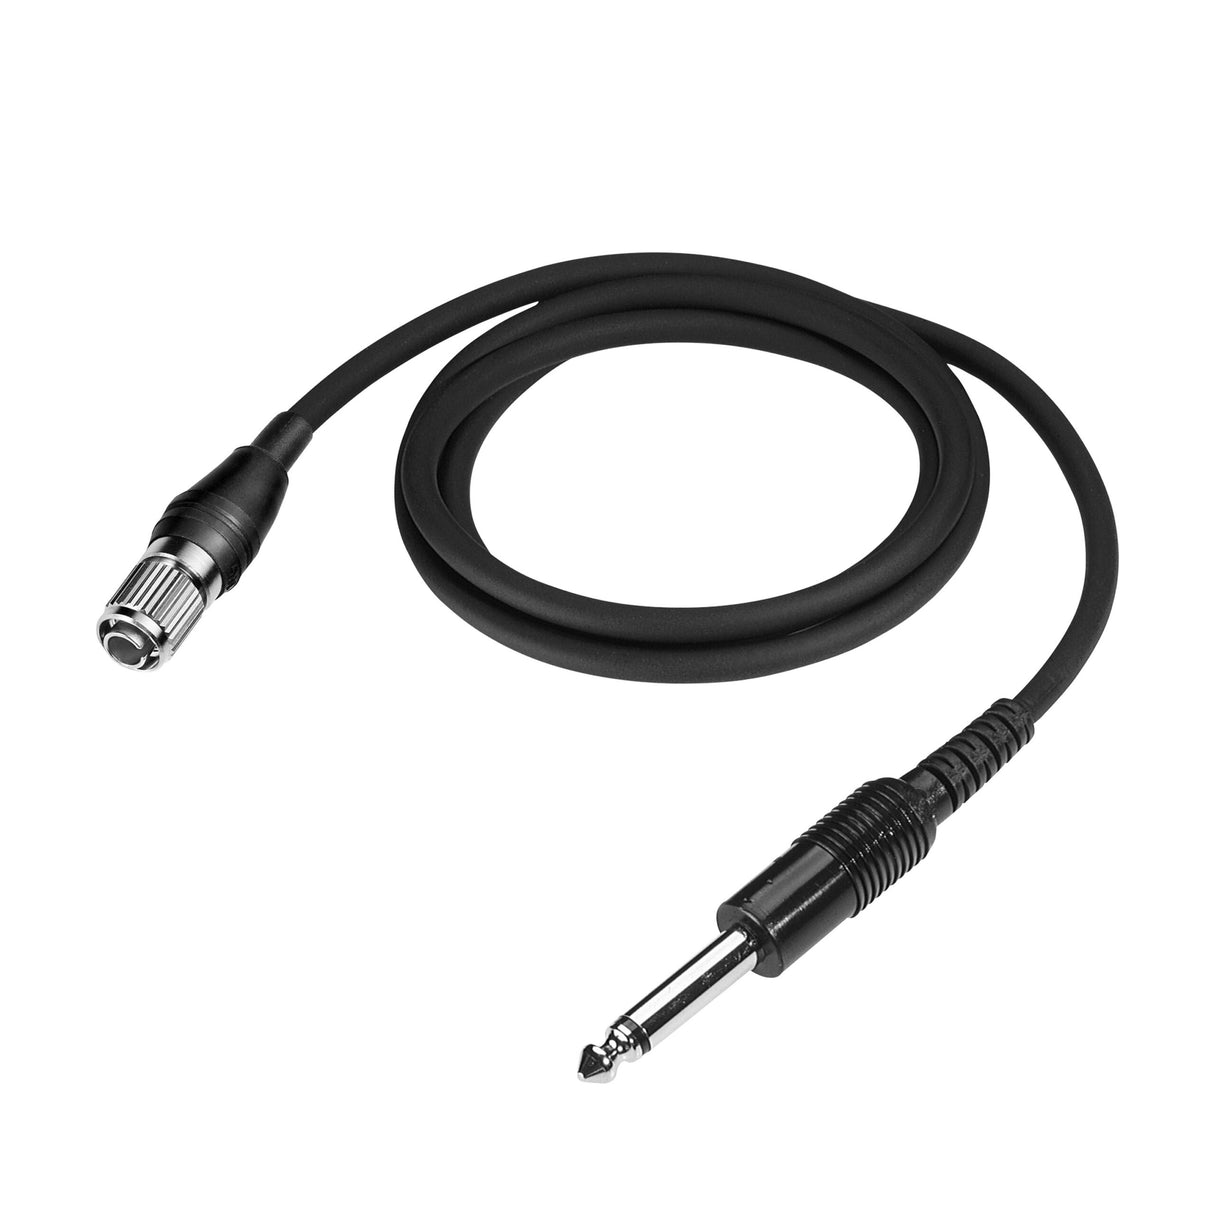 Audio-Technica AT-GcH Quarter Inch Guitar Input Cable for cH-Style Body-Pack Transmitters